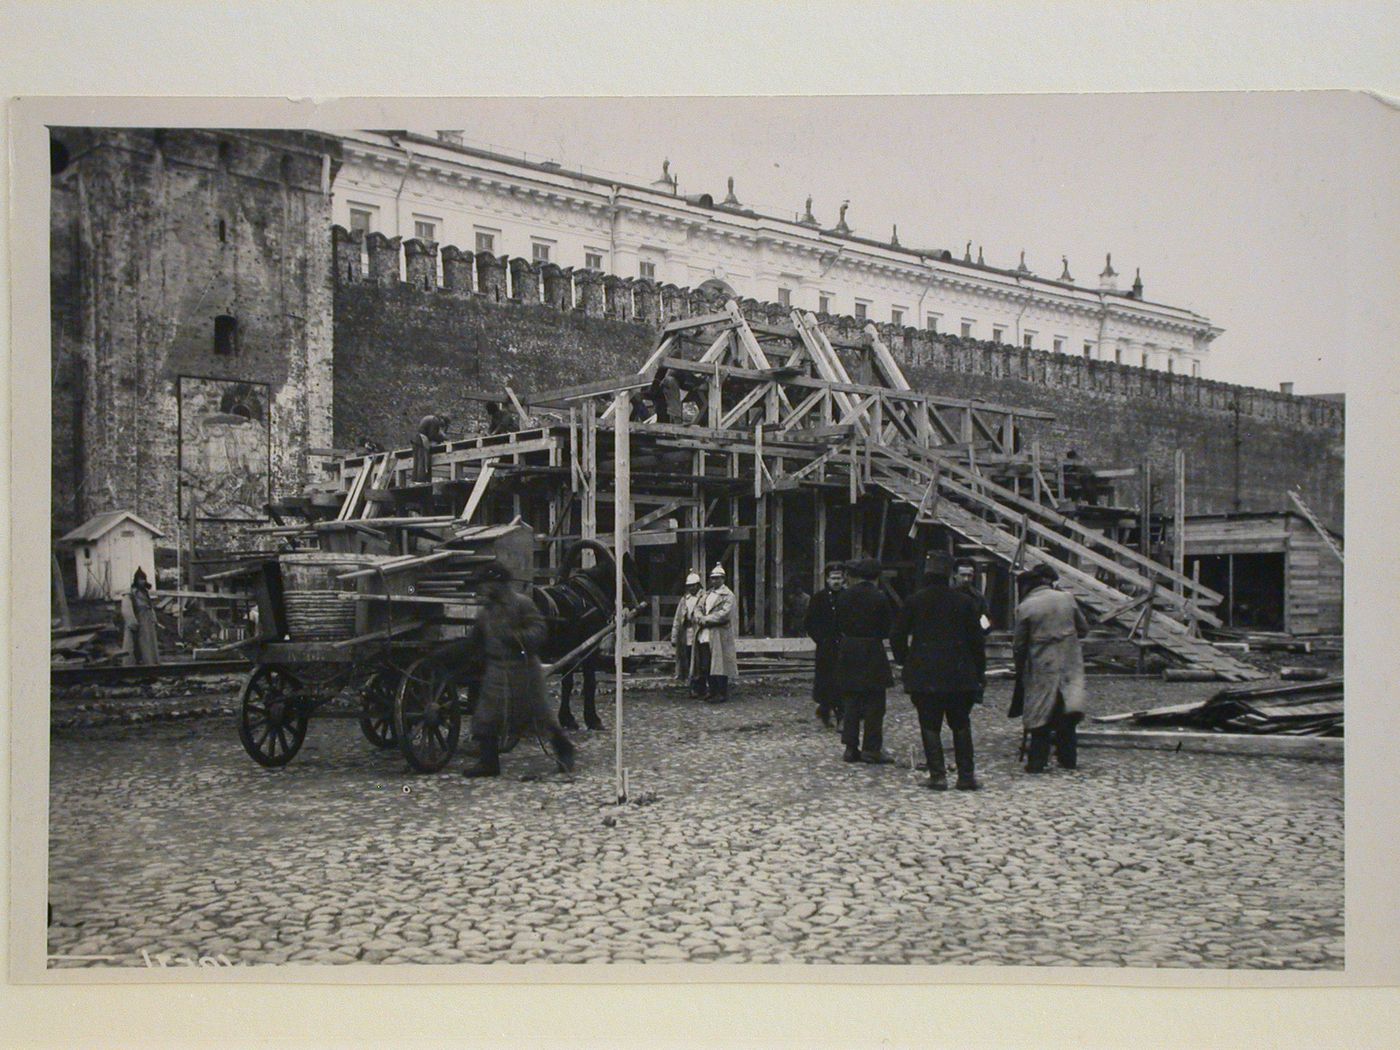 View of the second wooden Lenin Mausoleum under construction with workers, guards and a horse-driven loaded wagon in the foreground, Red Square, Moscow